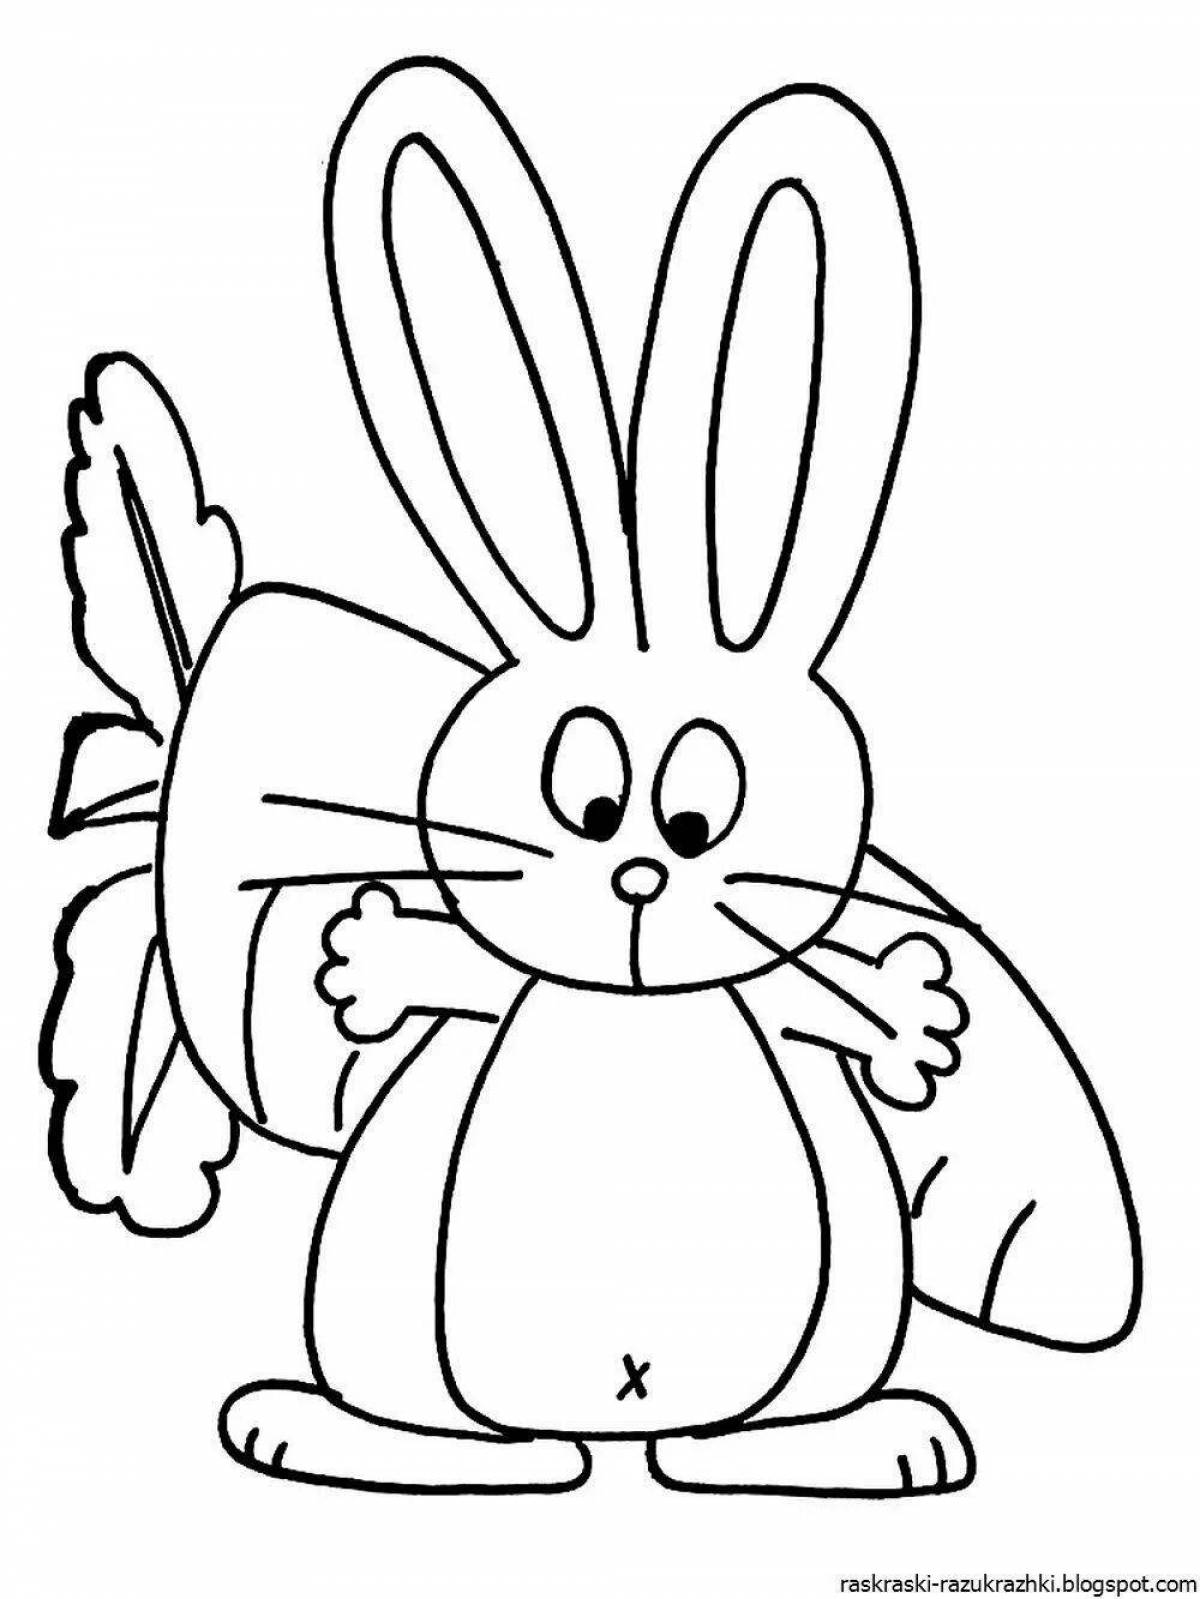 Joyful coloring rabbit with a carrot for children